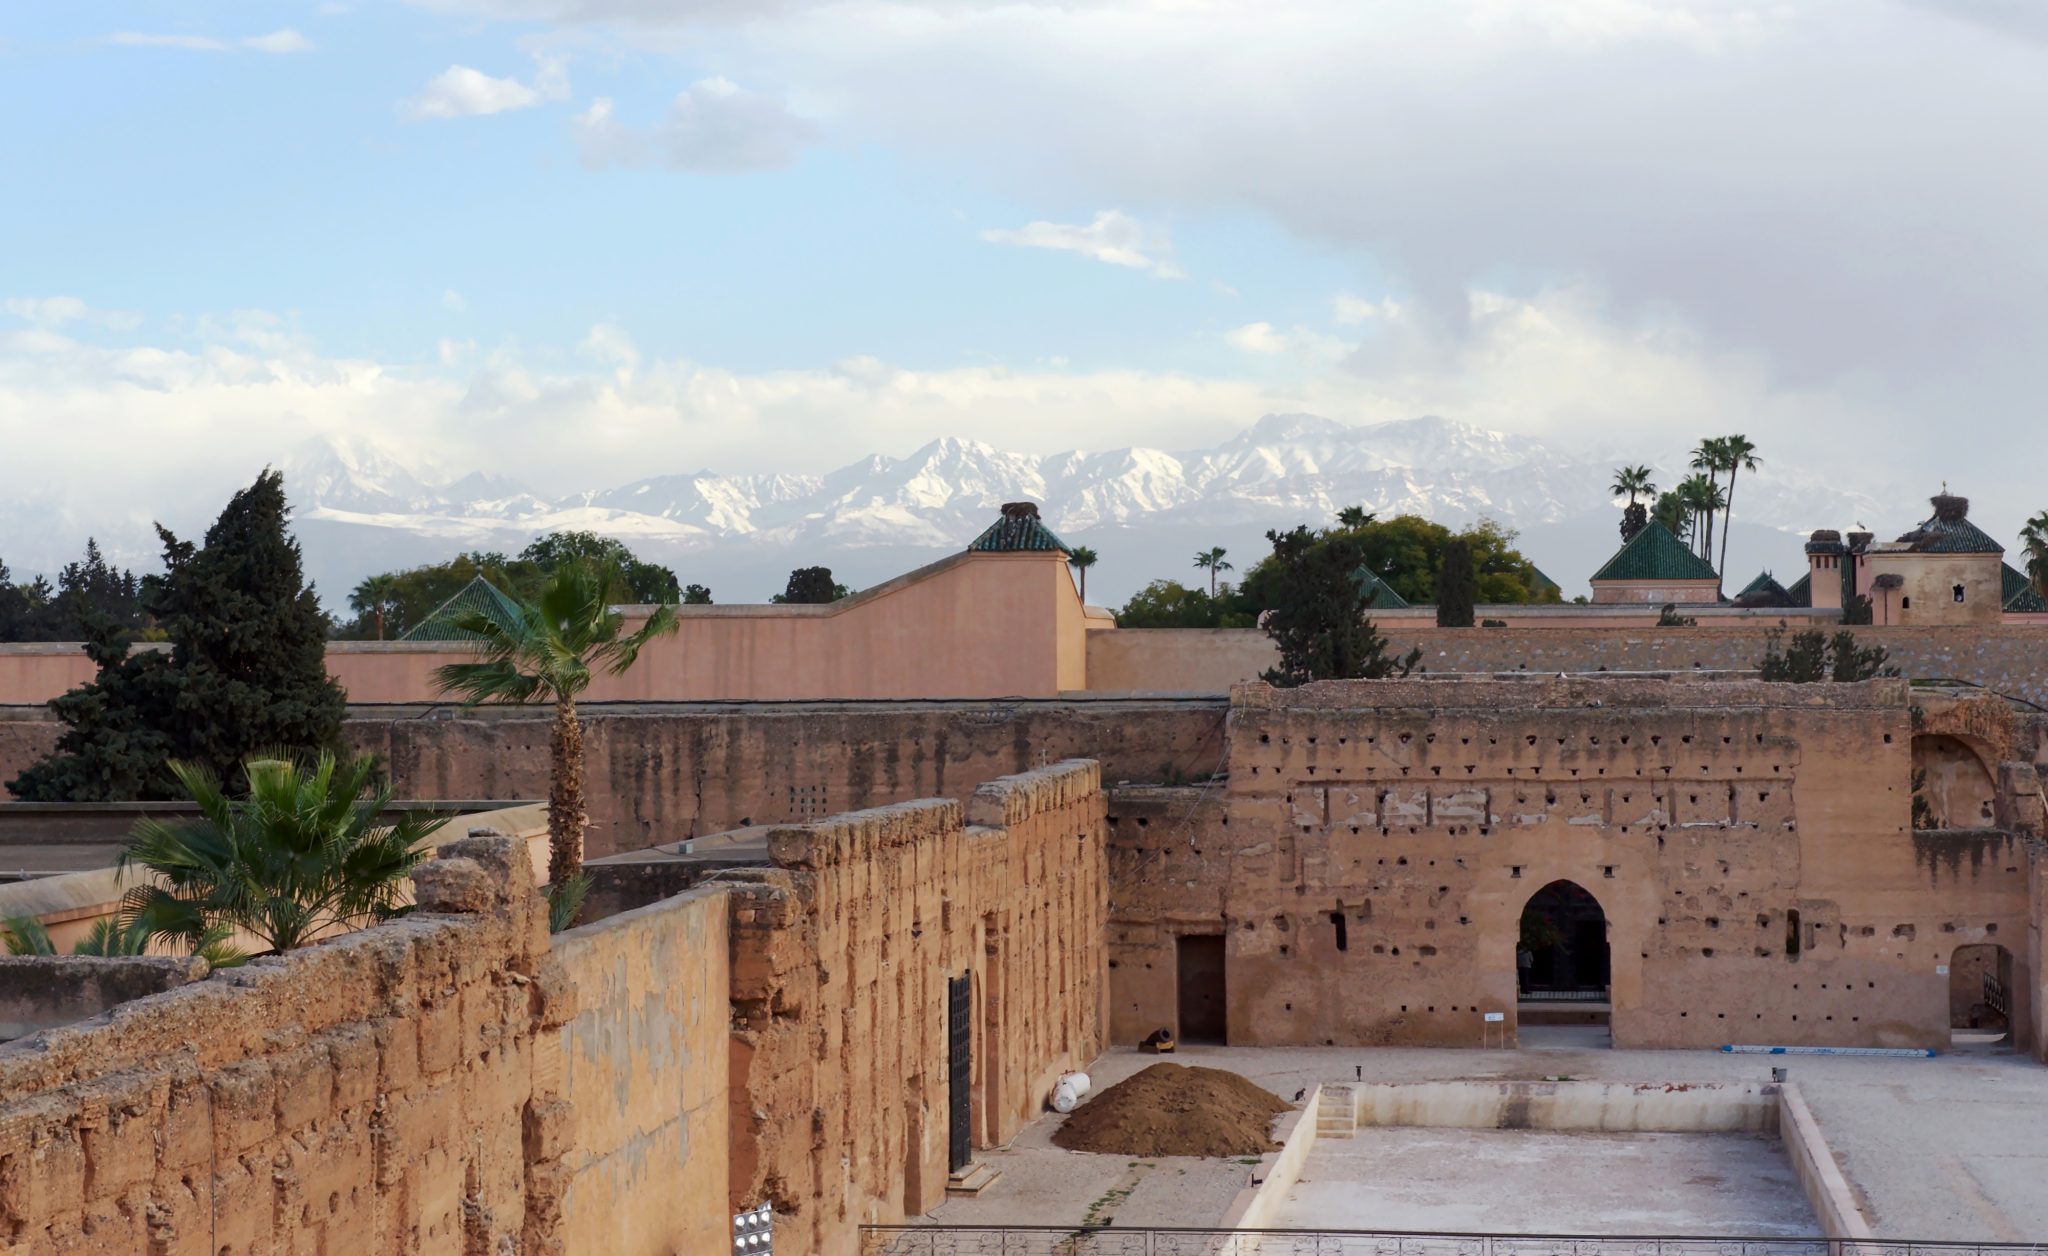 Ruins of the Badi Palace in Marrakech (Morocco)